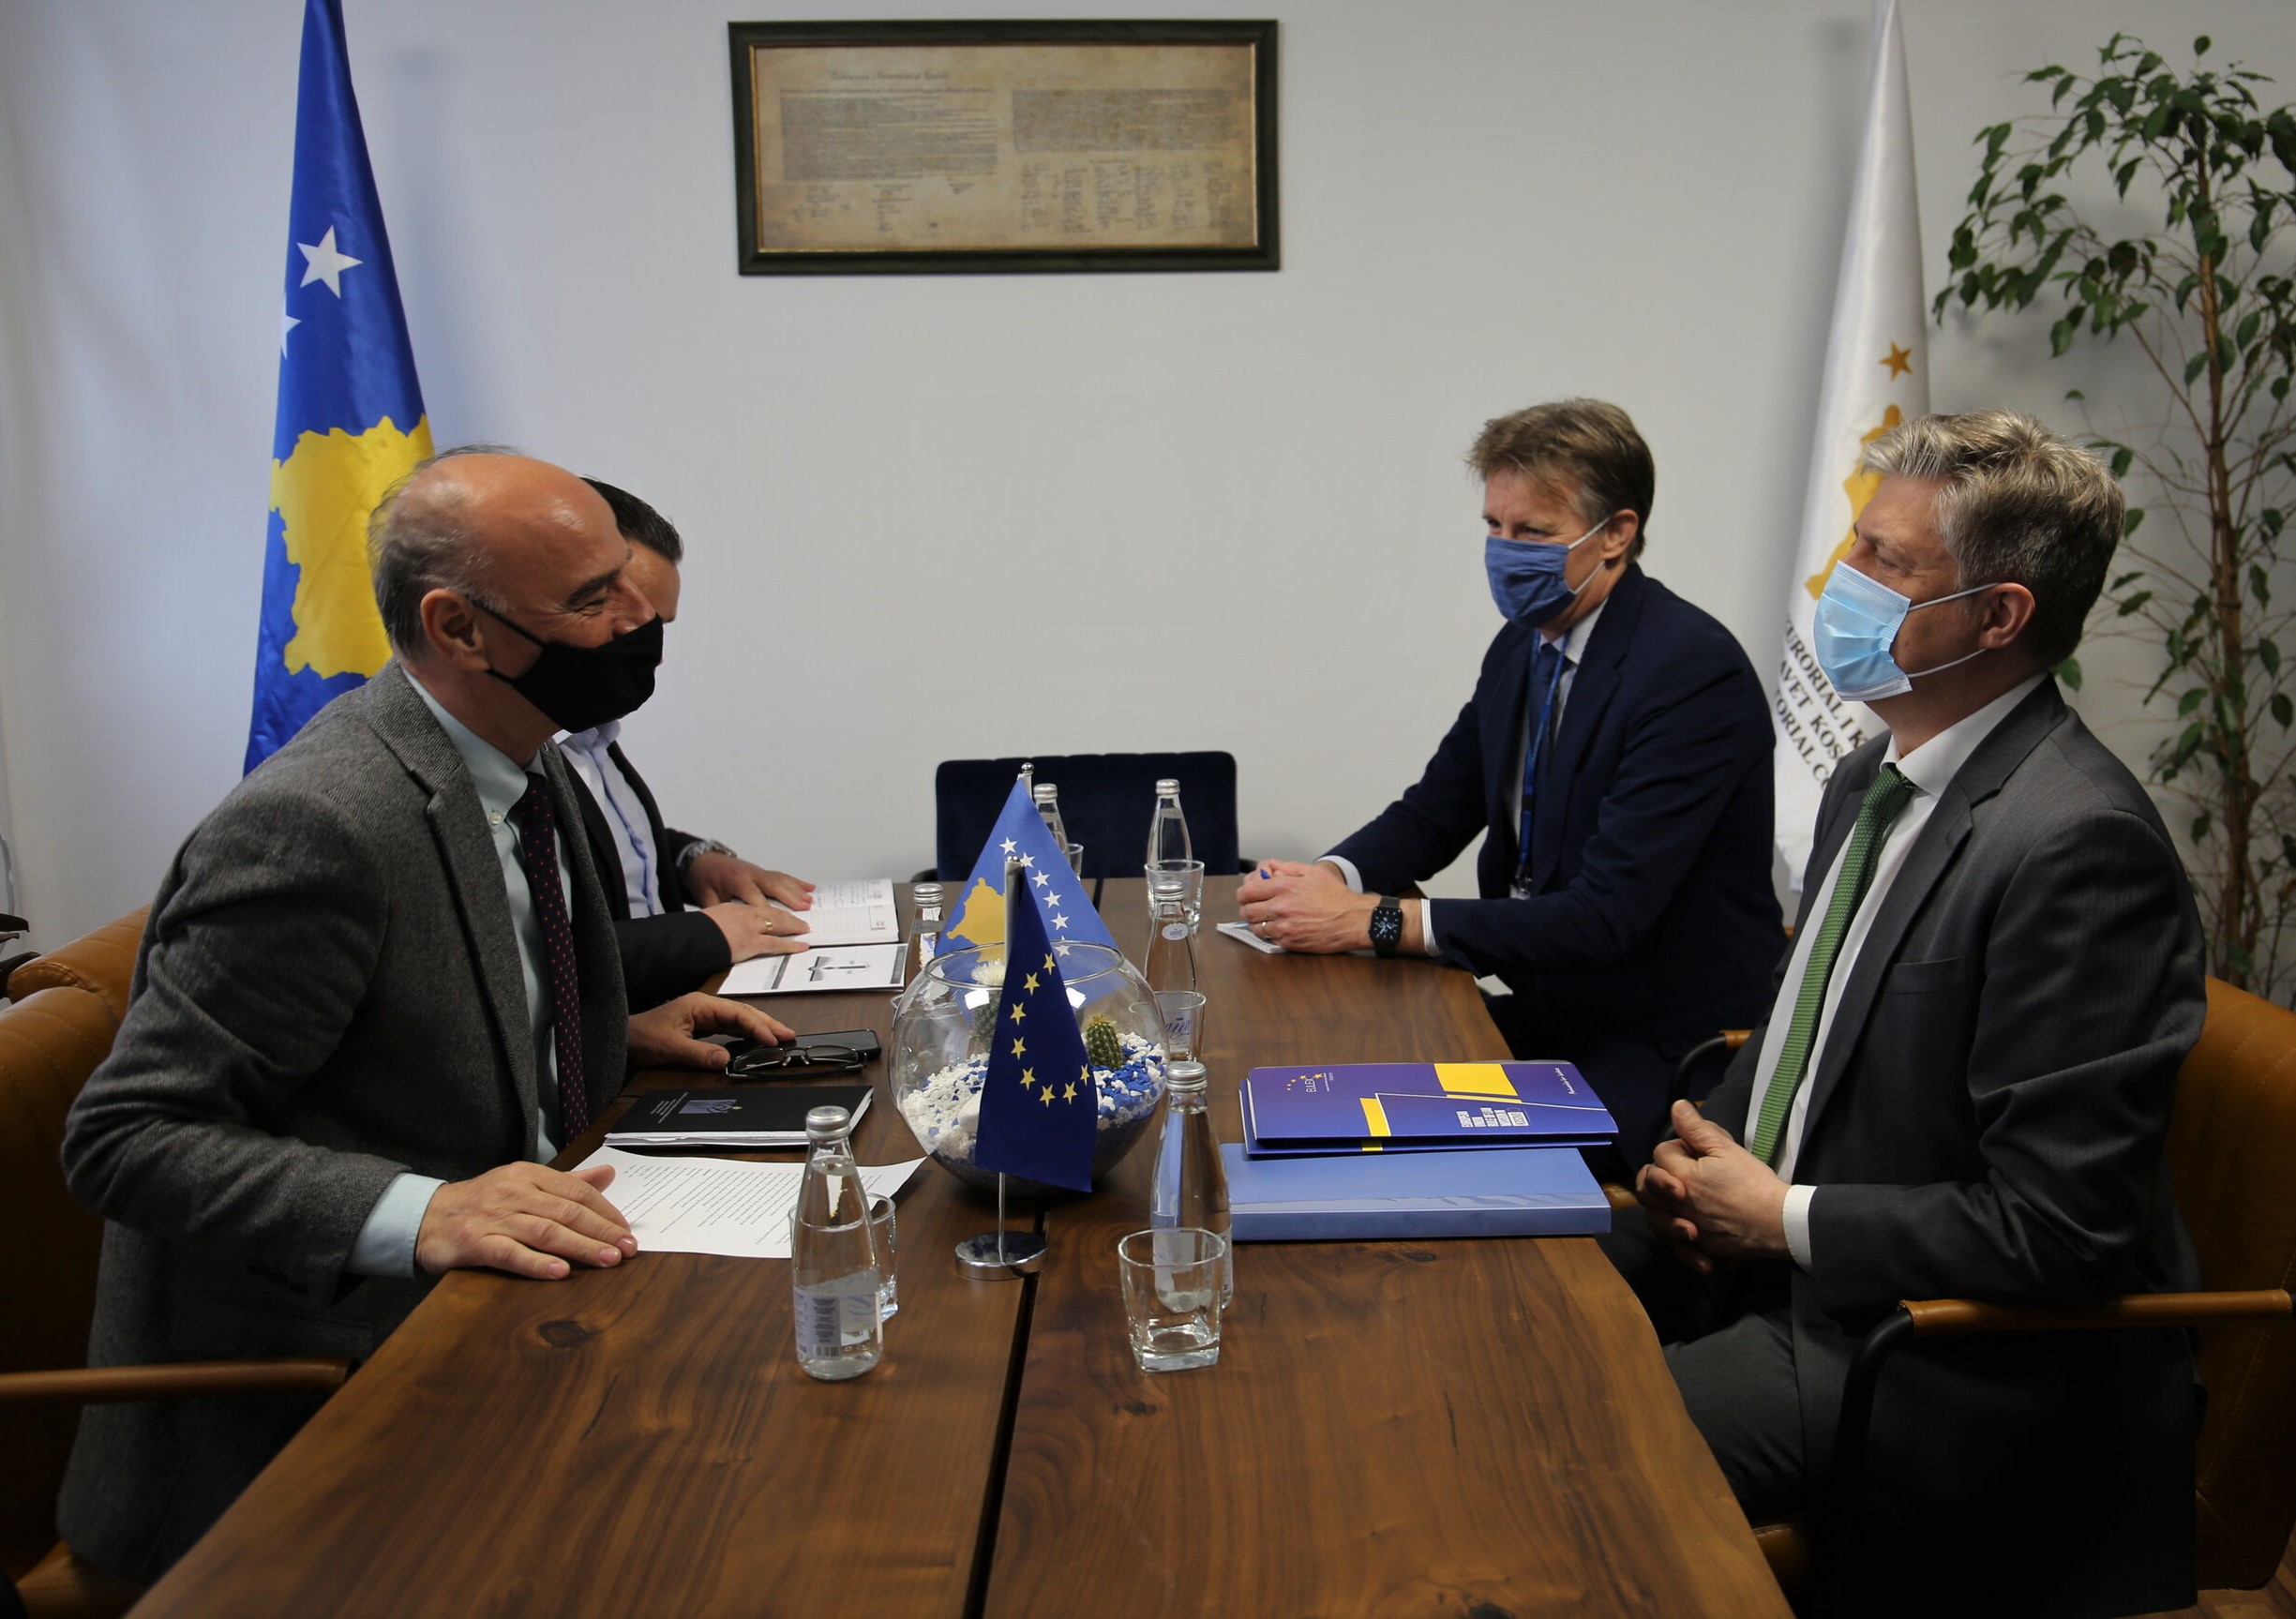 The cooperation of the Kosovo prosecutorial system with EULEX is appreciated